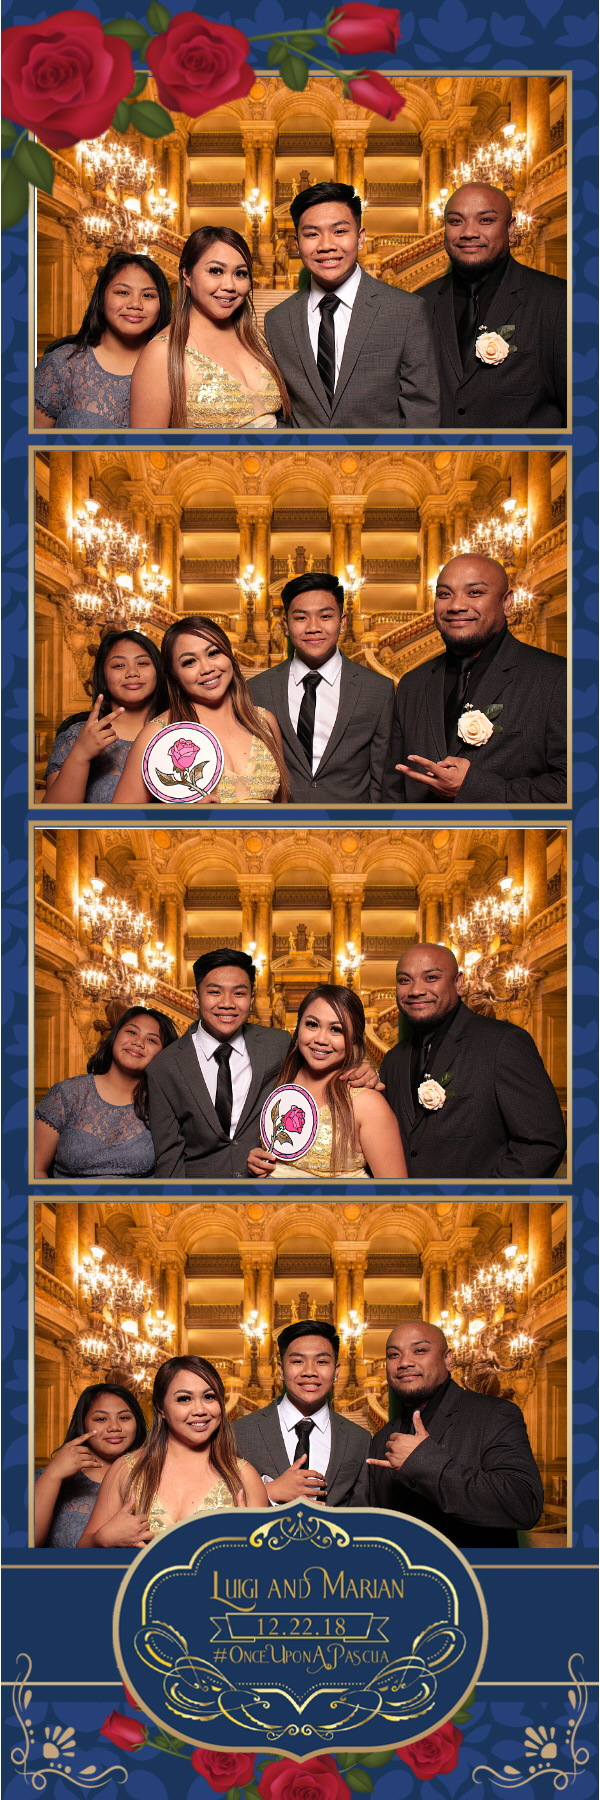 2x6 photo strip of group posing in front of grand entrance backdrop